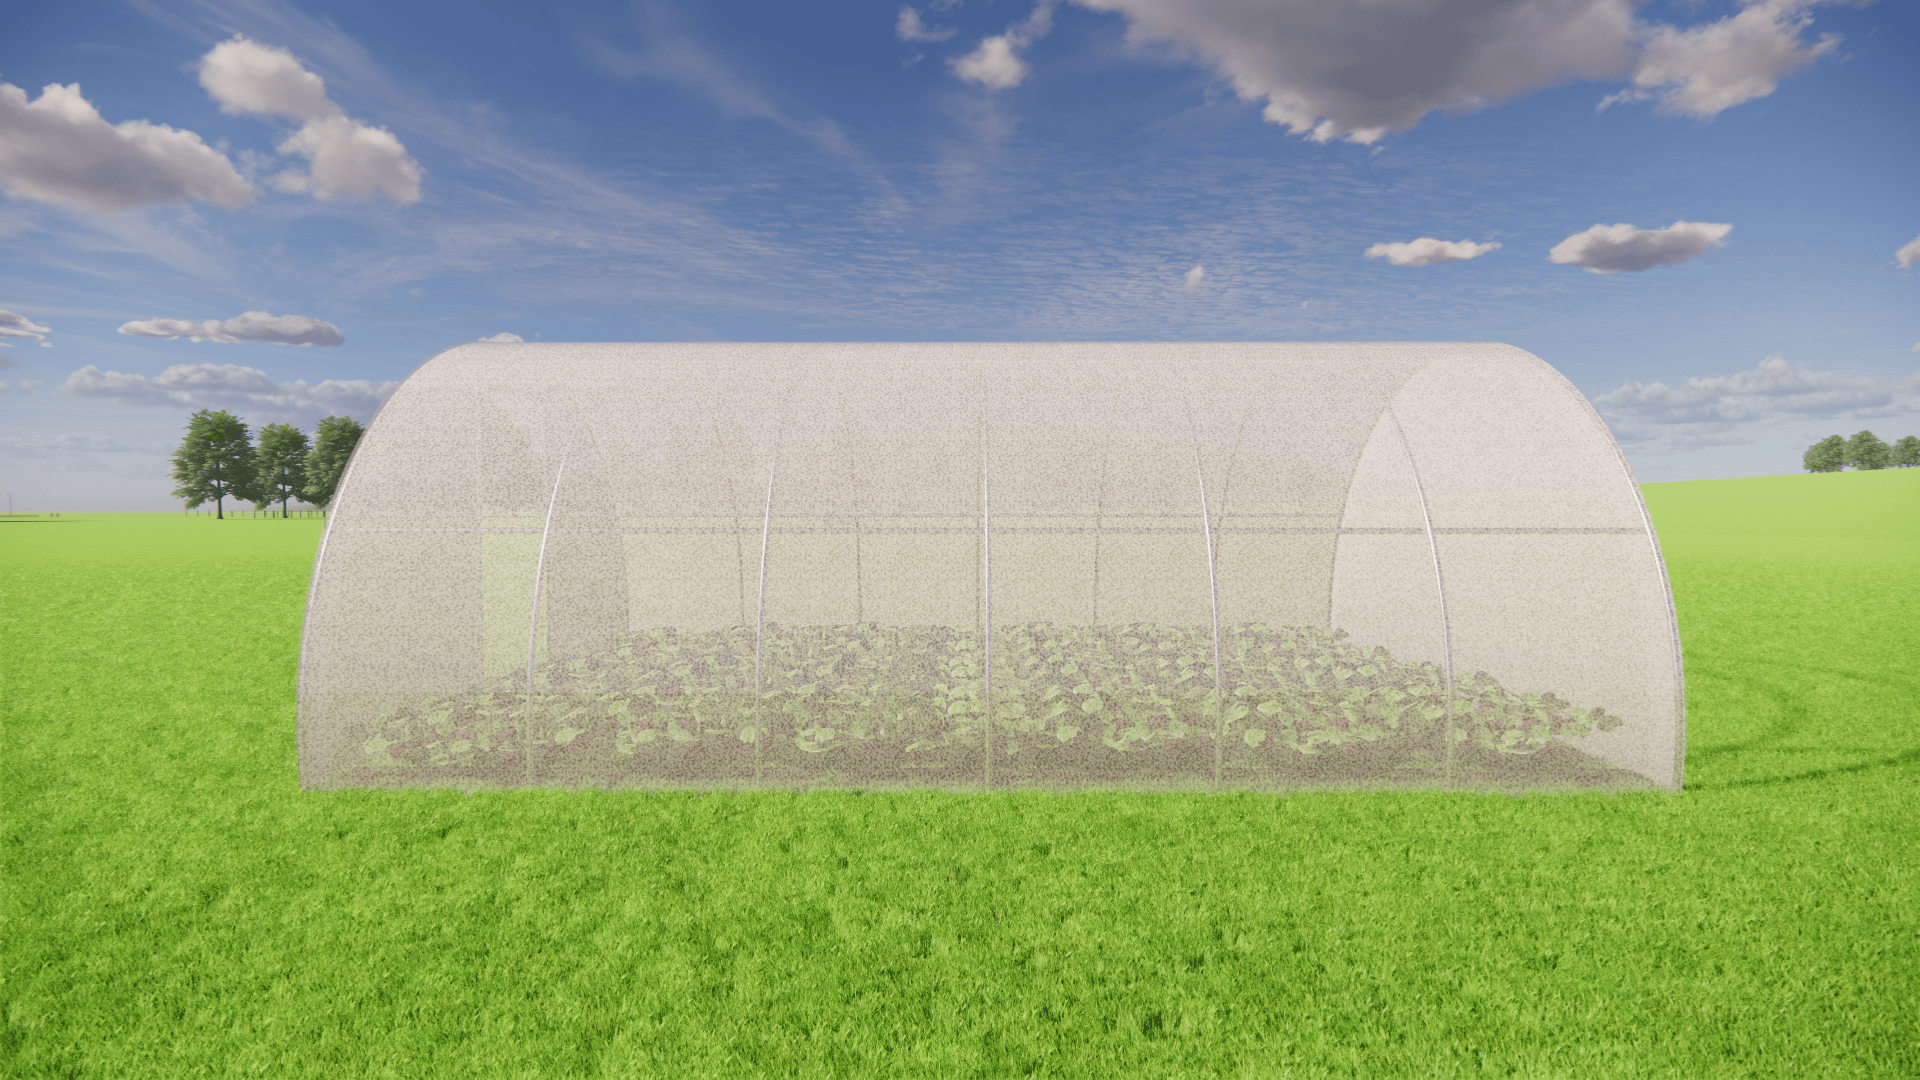 Polytunnel Covers for Crop Protection 22